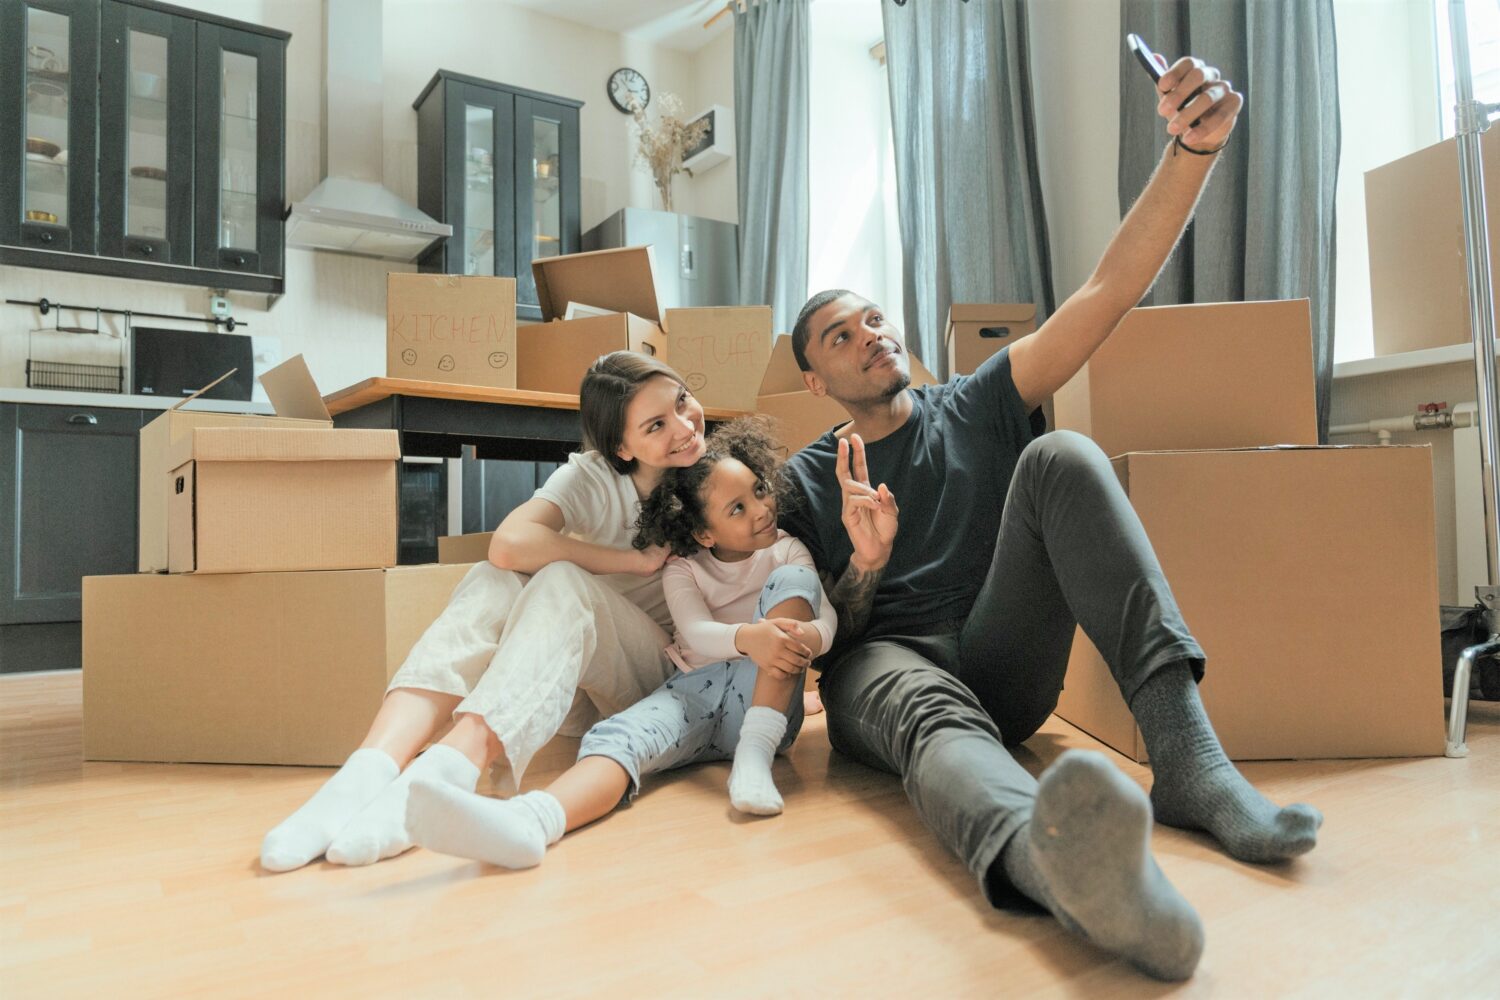 Family poses for selfie among moving boxes.